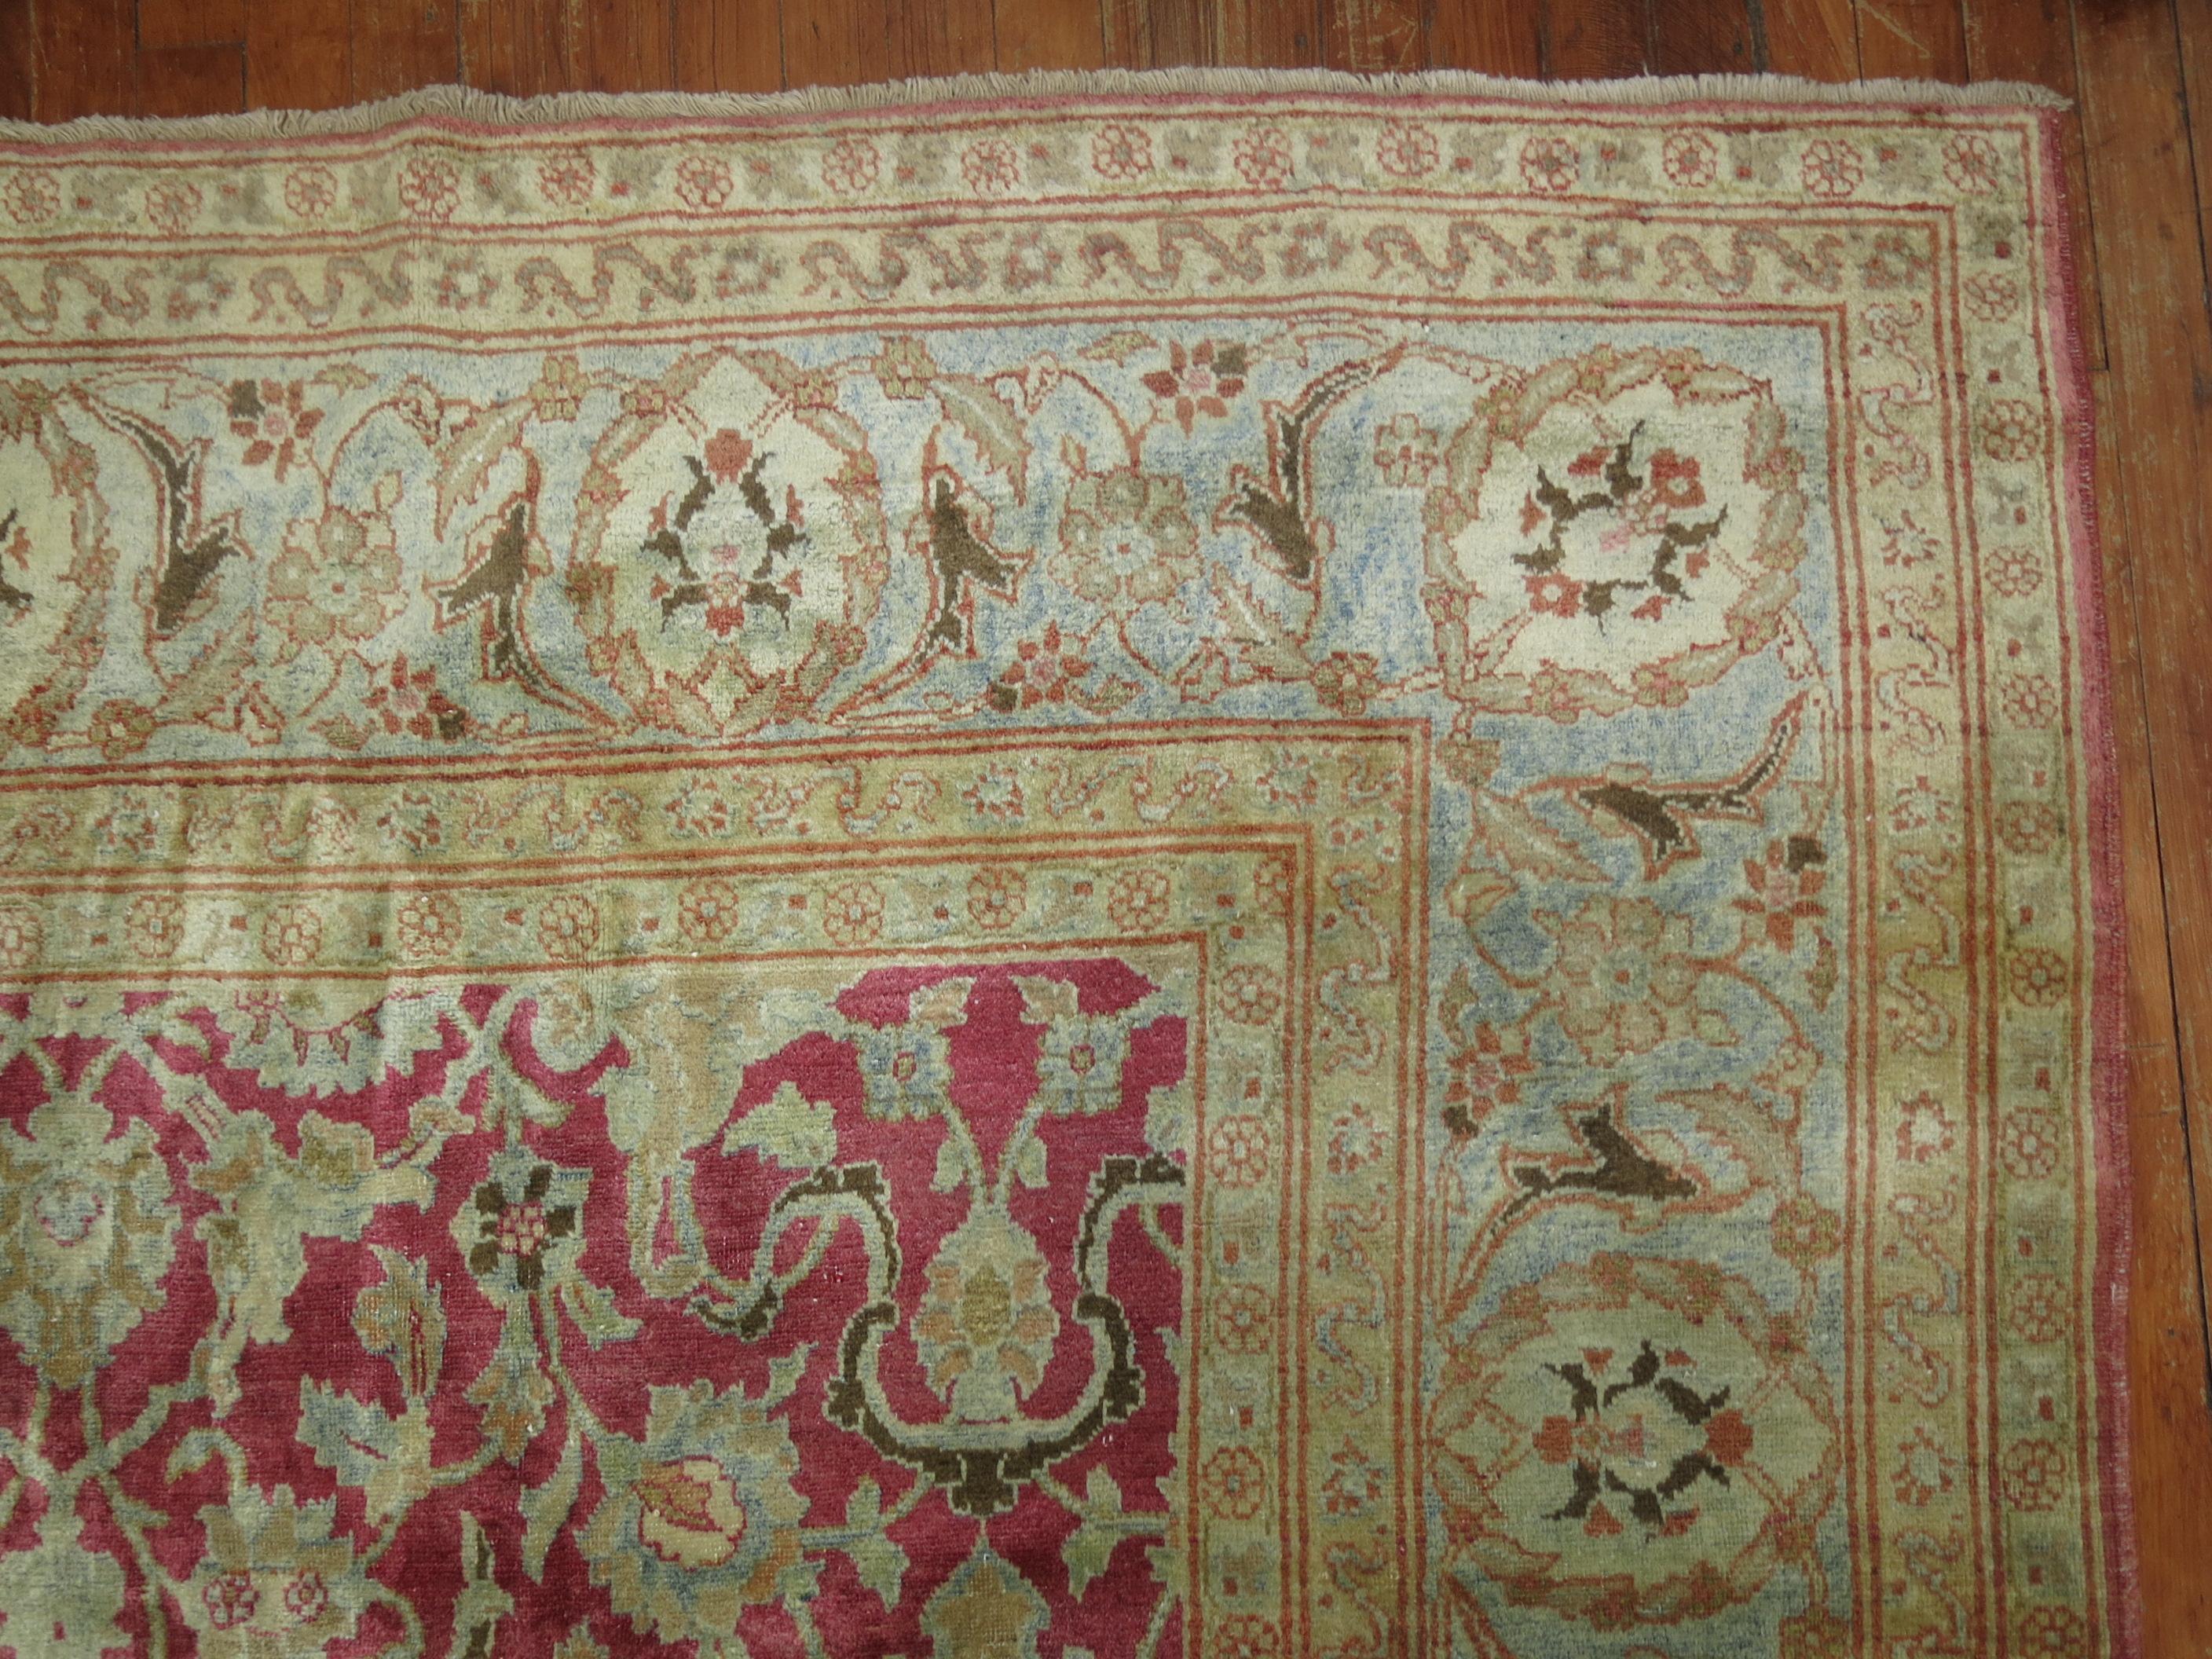 Raspberry Icy Blue Oversize Persian Tabriz Rug, Early 20th Century For Sale 3